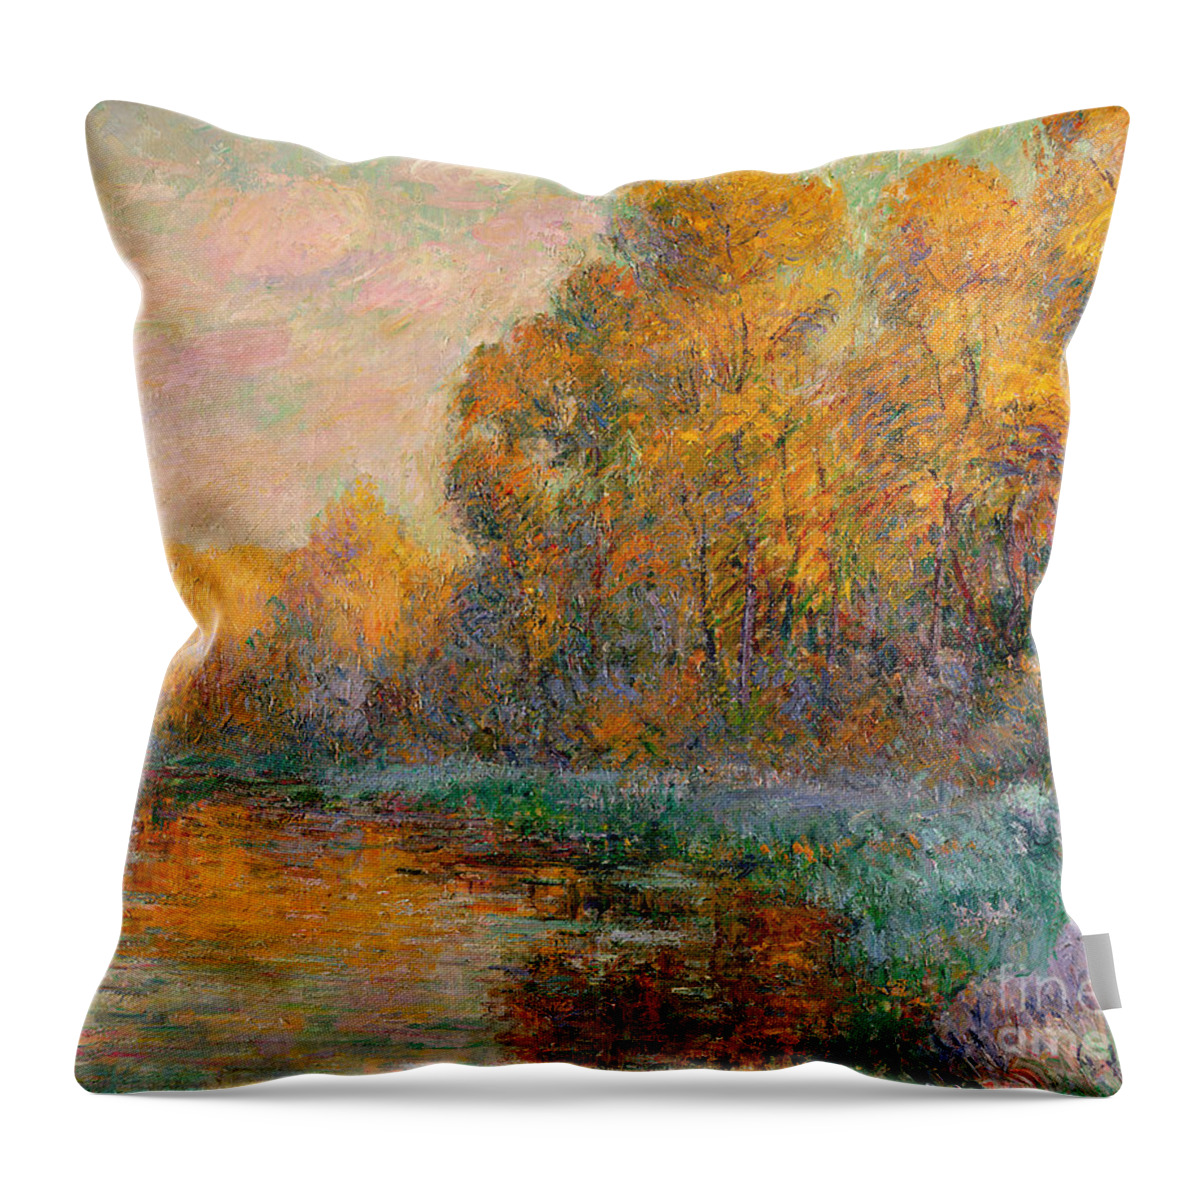 River Throw Pillow featuring the painting A River in Autumn, 1909 by Gustave Loiseau by Gustave Loiseau